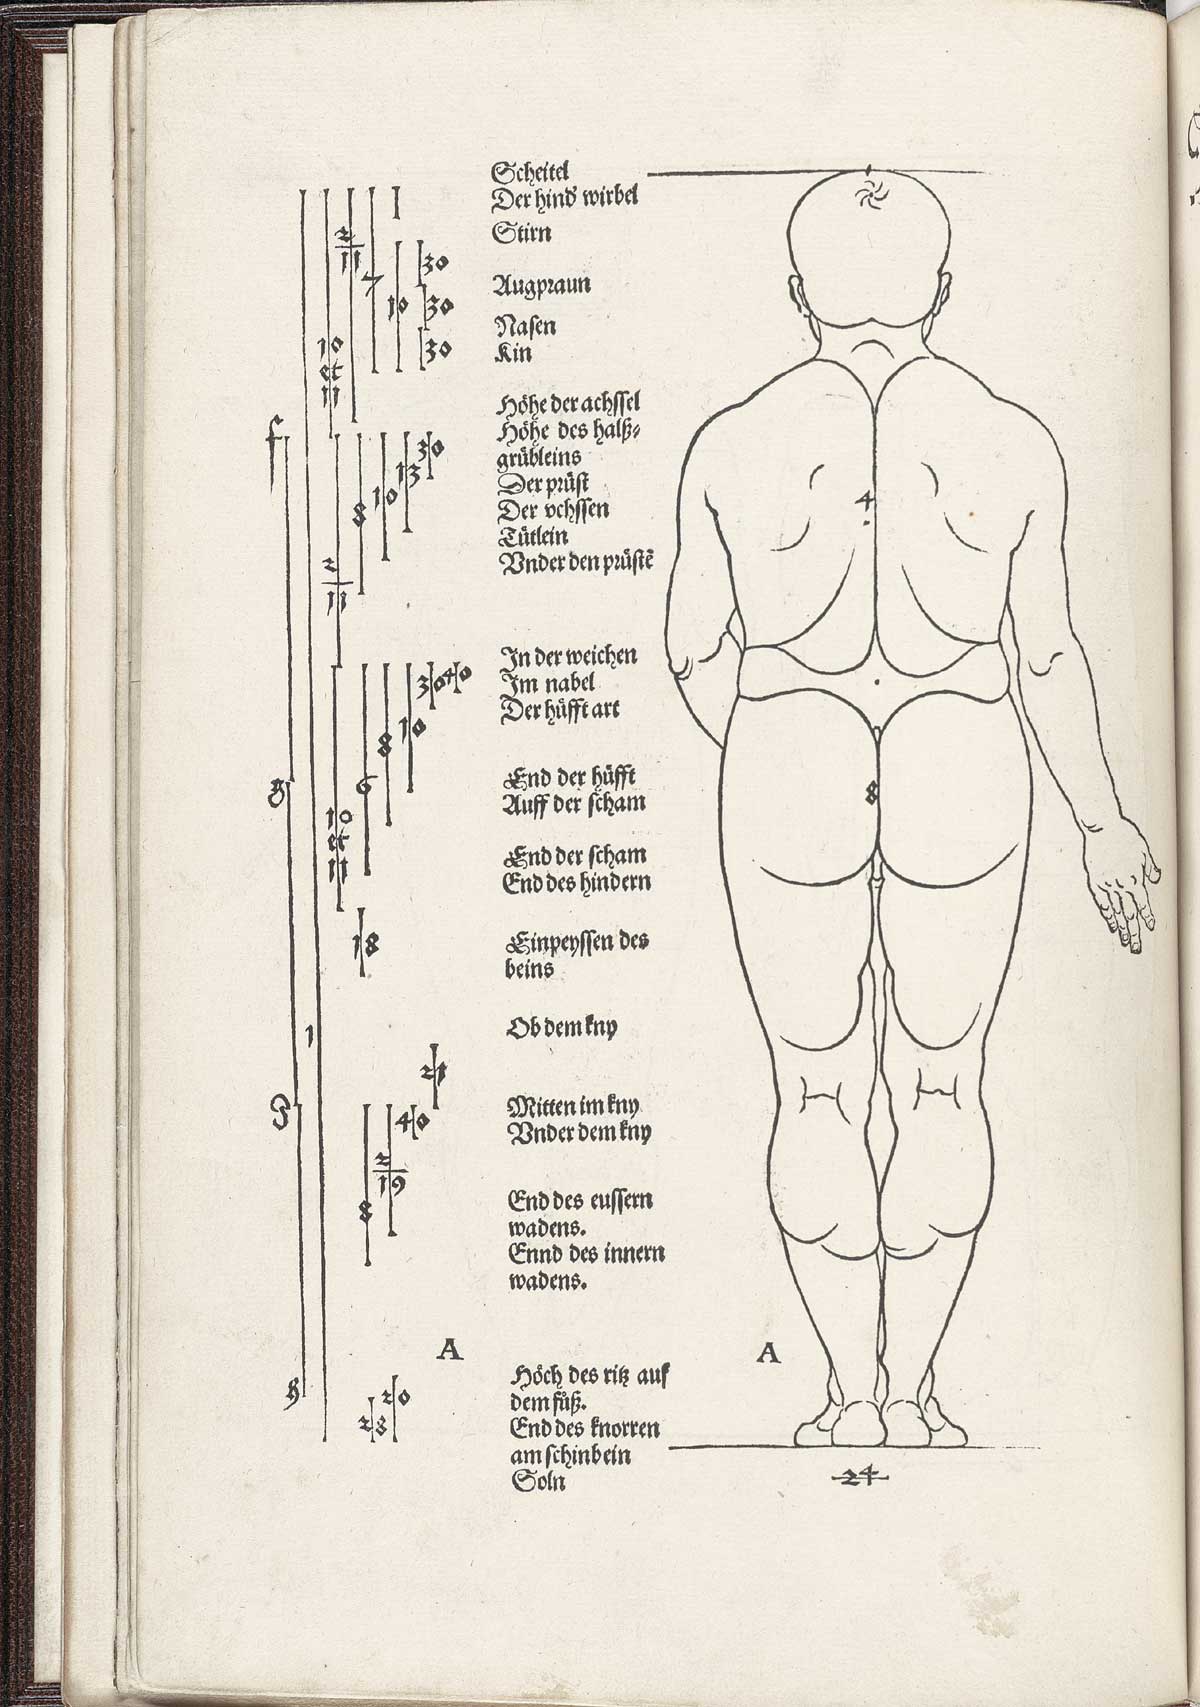 Woodcut image of a standing nude male figure, with back to the viewer with horizontal lines cutting across the figures showing proportions, for instance fromm the bottom of the chin to the top of the shoulder, from Albrecht Dürer’s Vier Bücher von menschlicher Proportion, NLM Call no. WZ 240 D853v 1528.